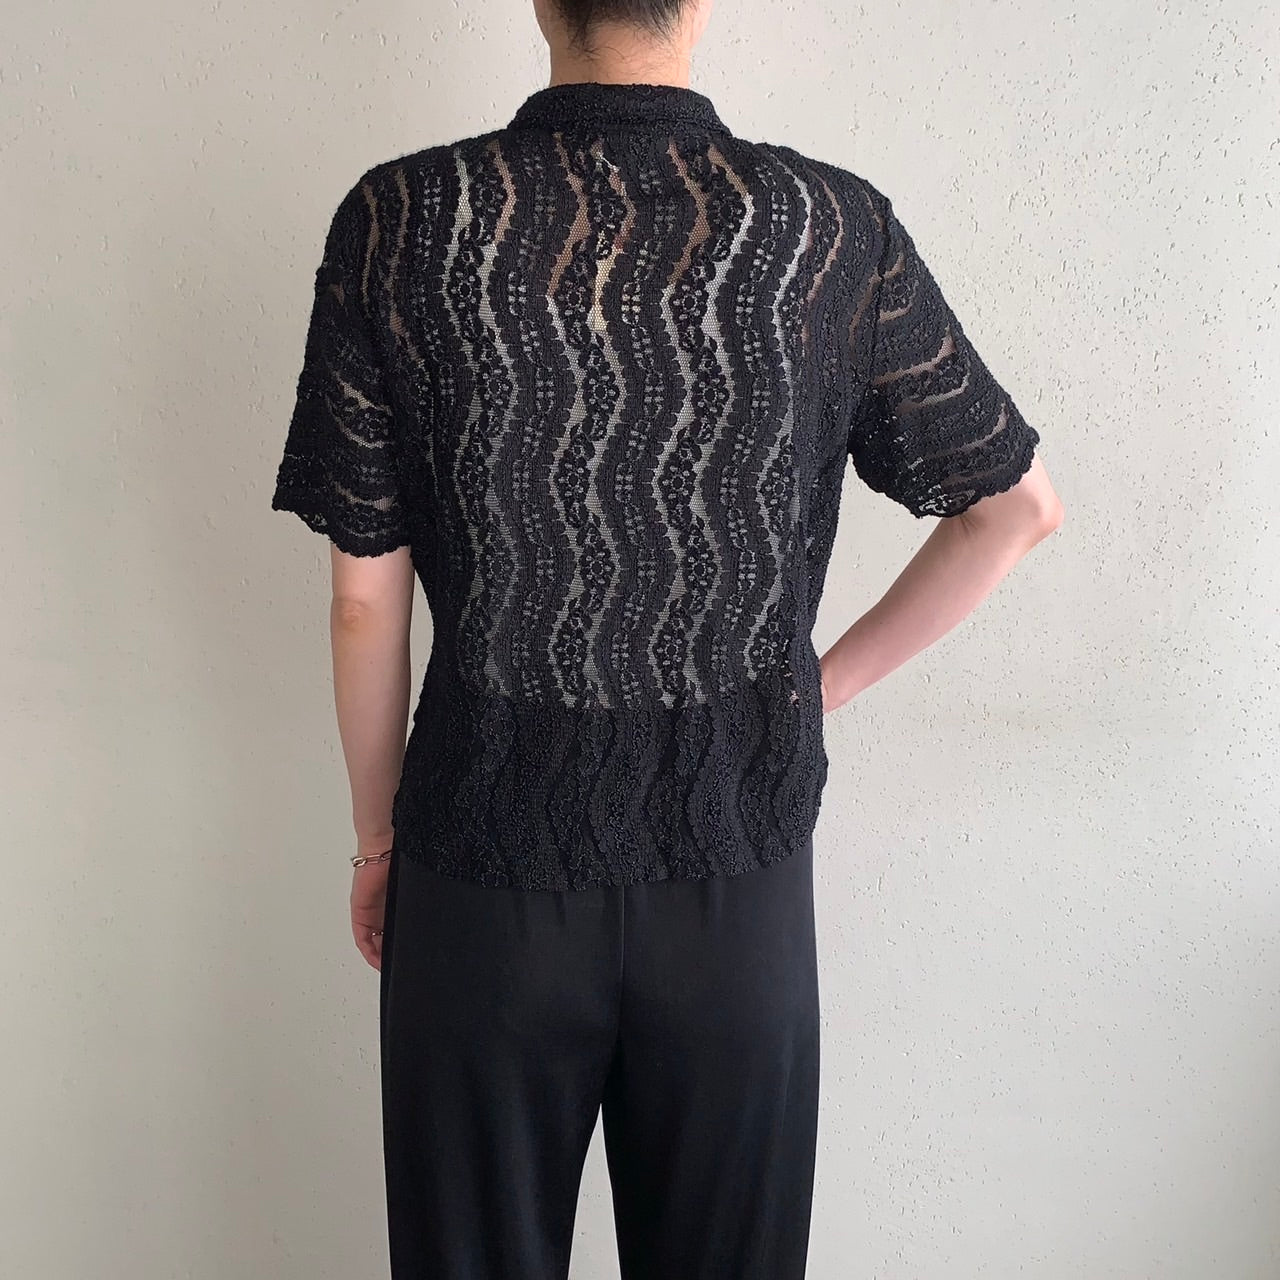 90s Lace Top Made in Italy